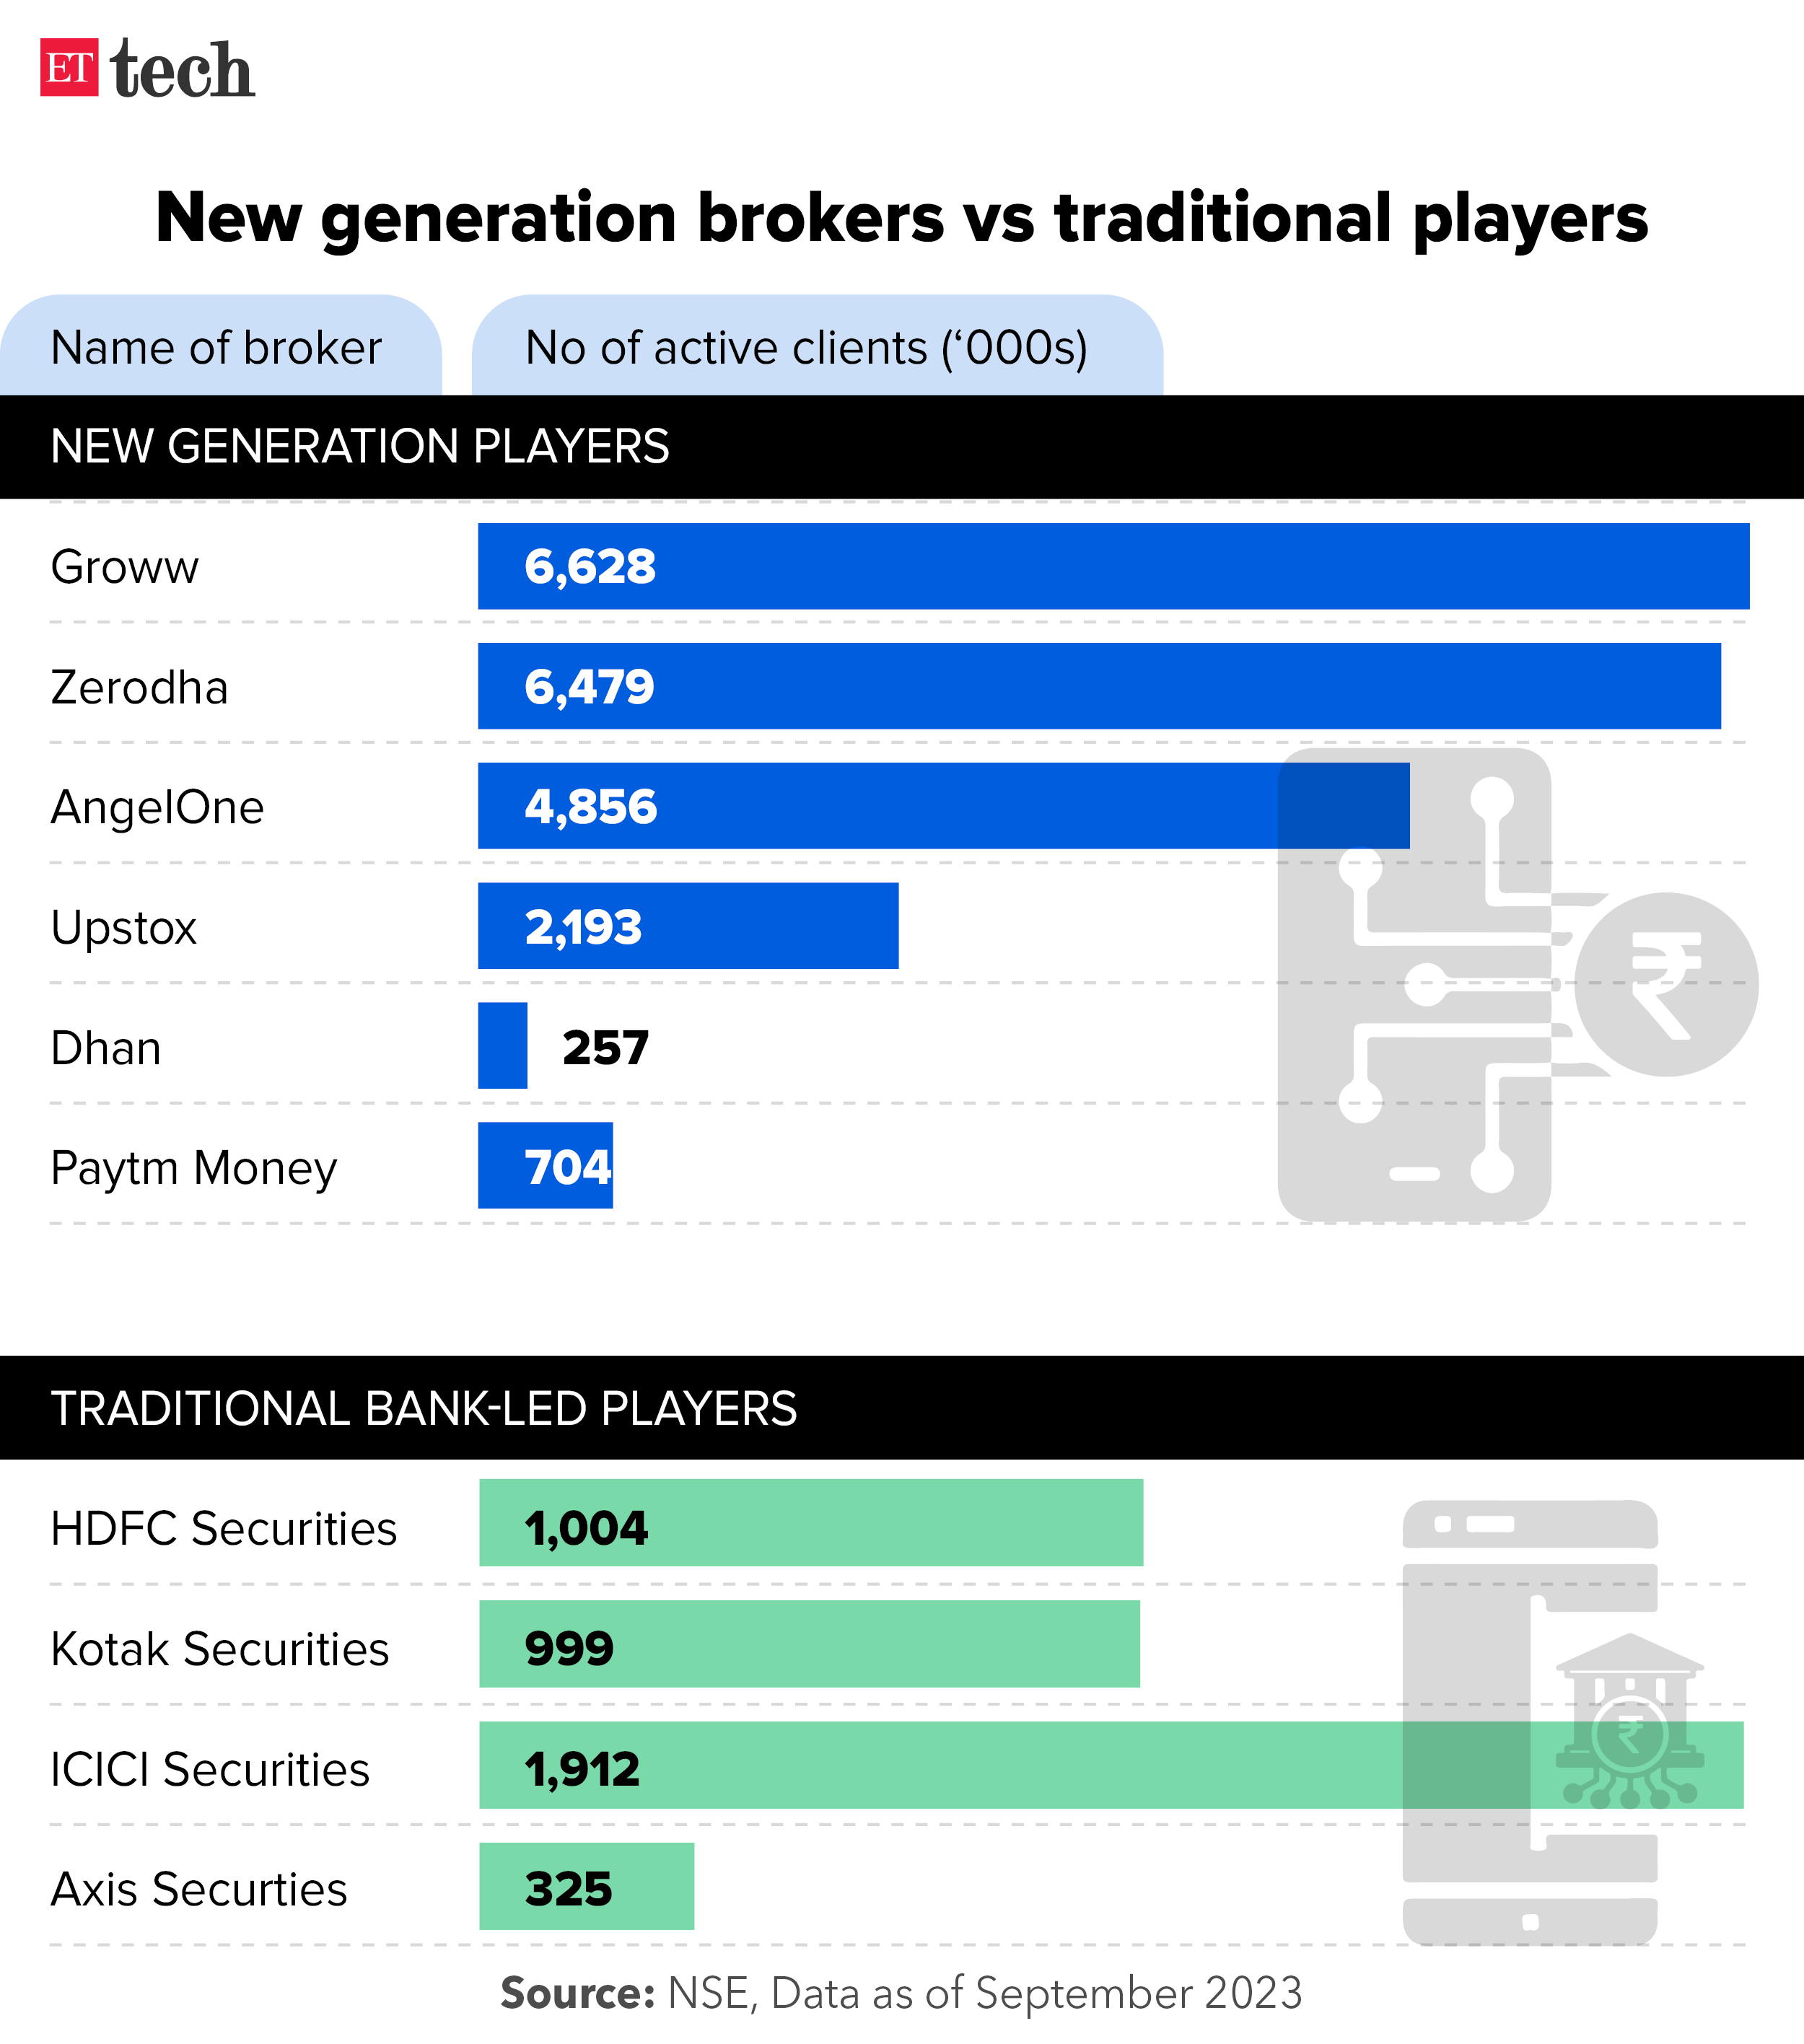 New generation brokers vs traditional players